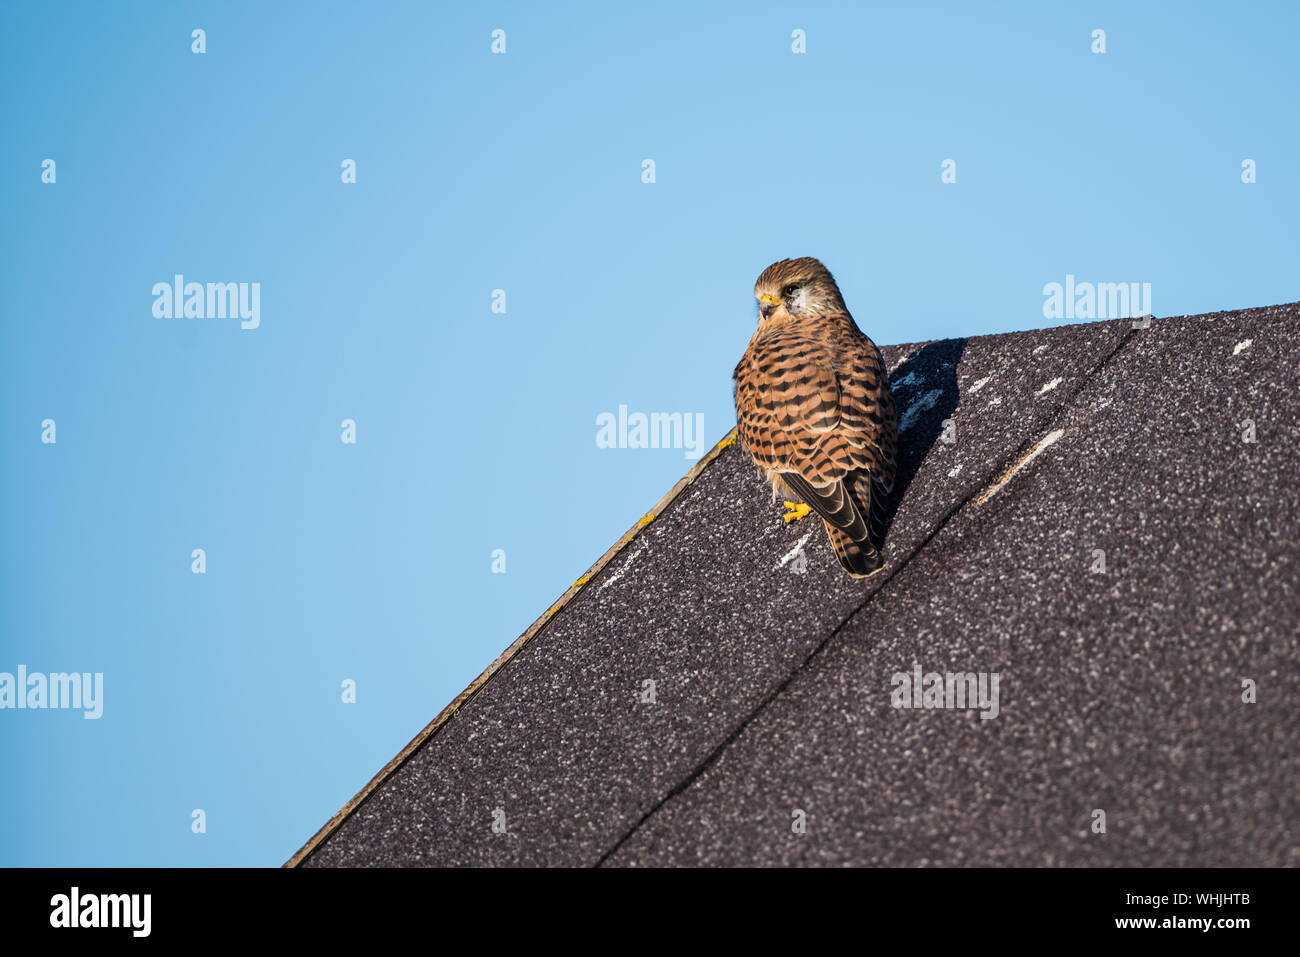 Common kestrel perched on a shed roof against a blue sky Stock Photo